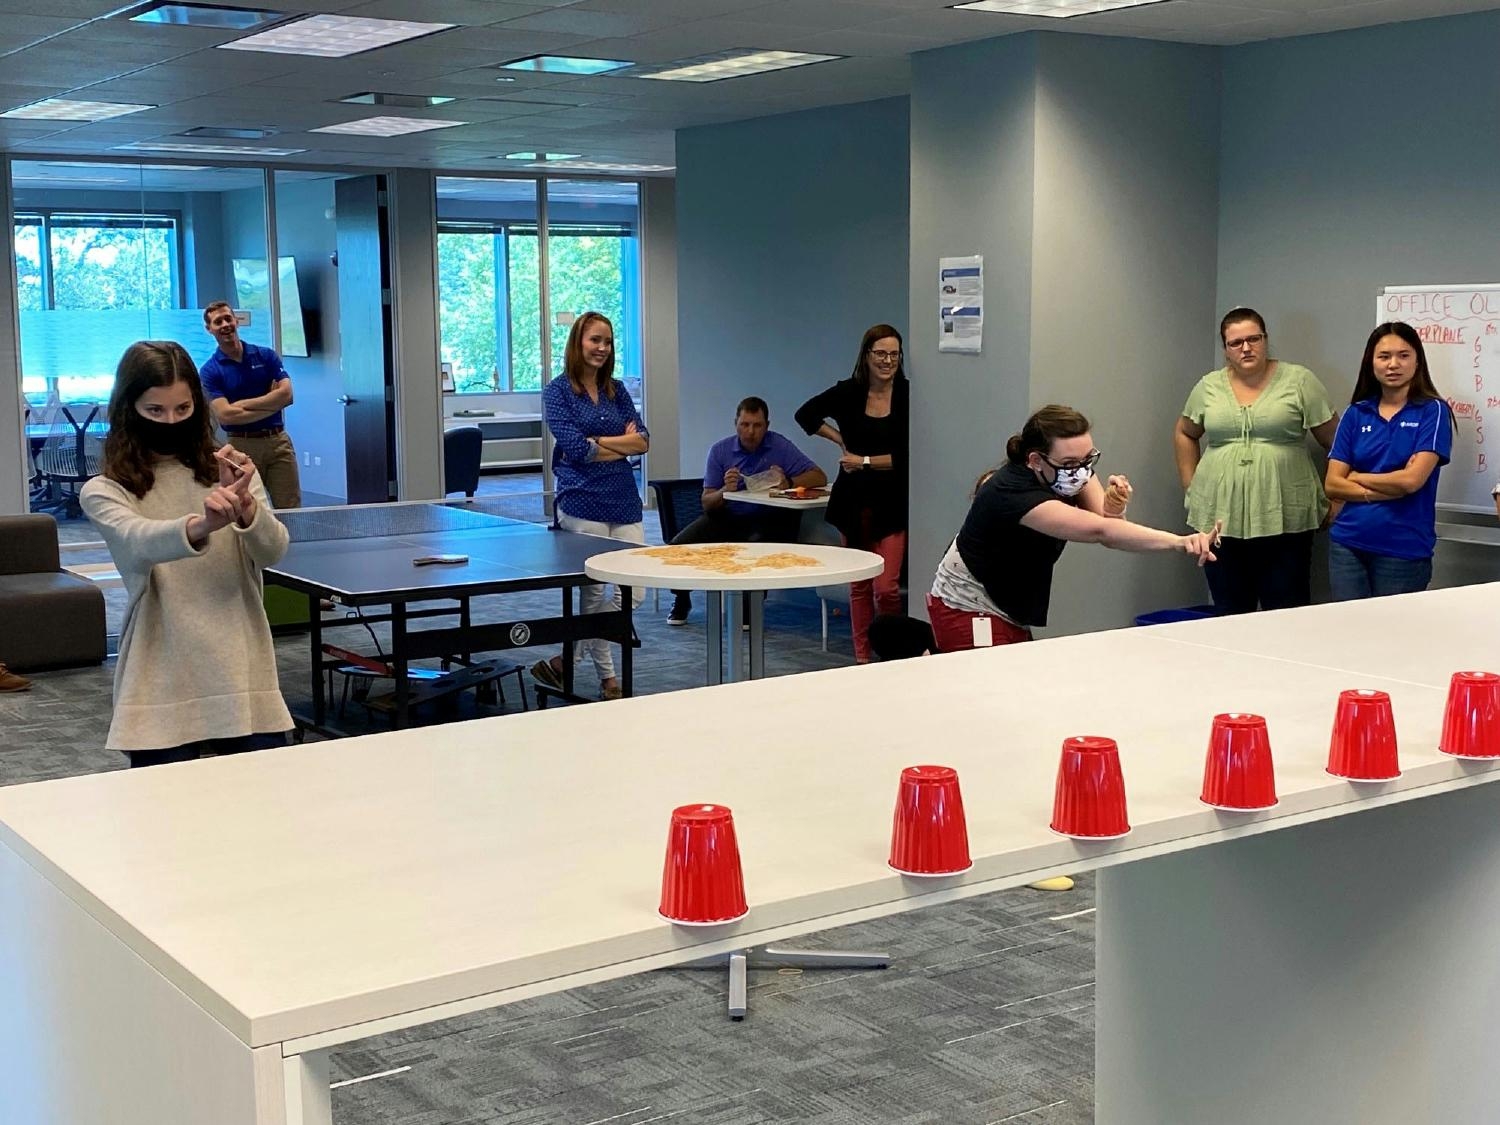 Office Olympics at Ardeo - always a great time